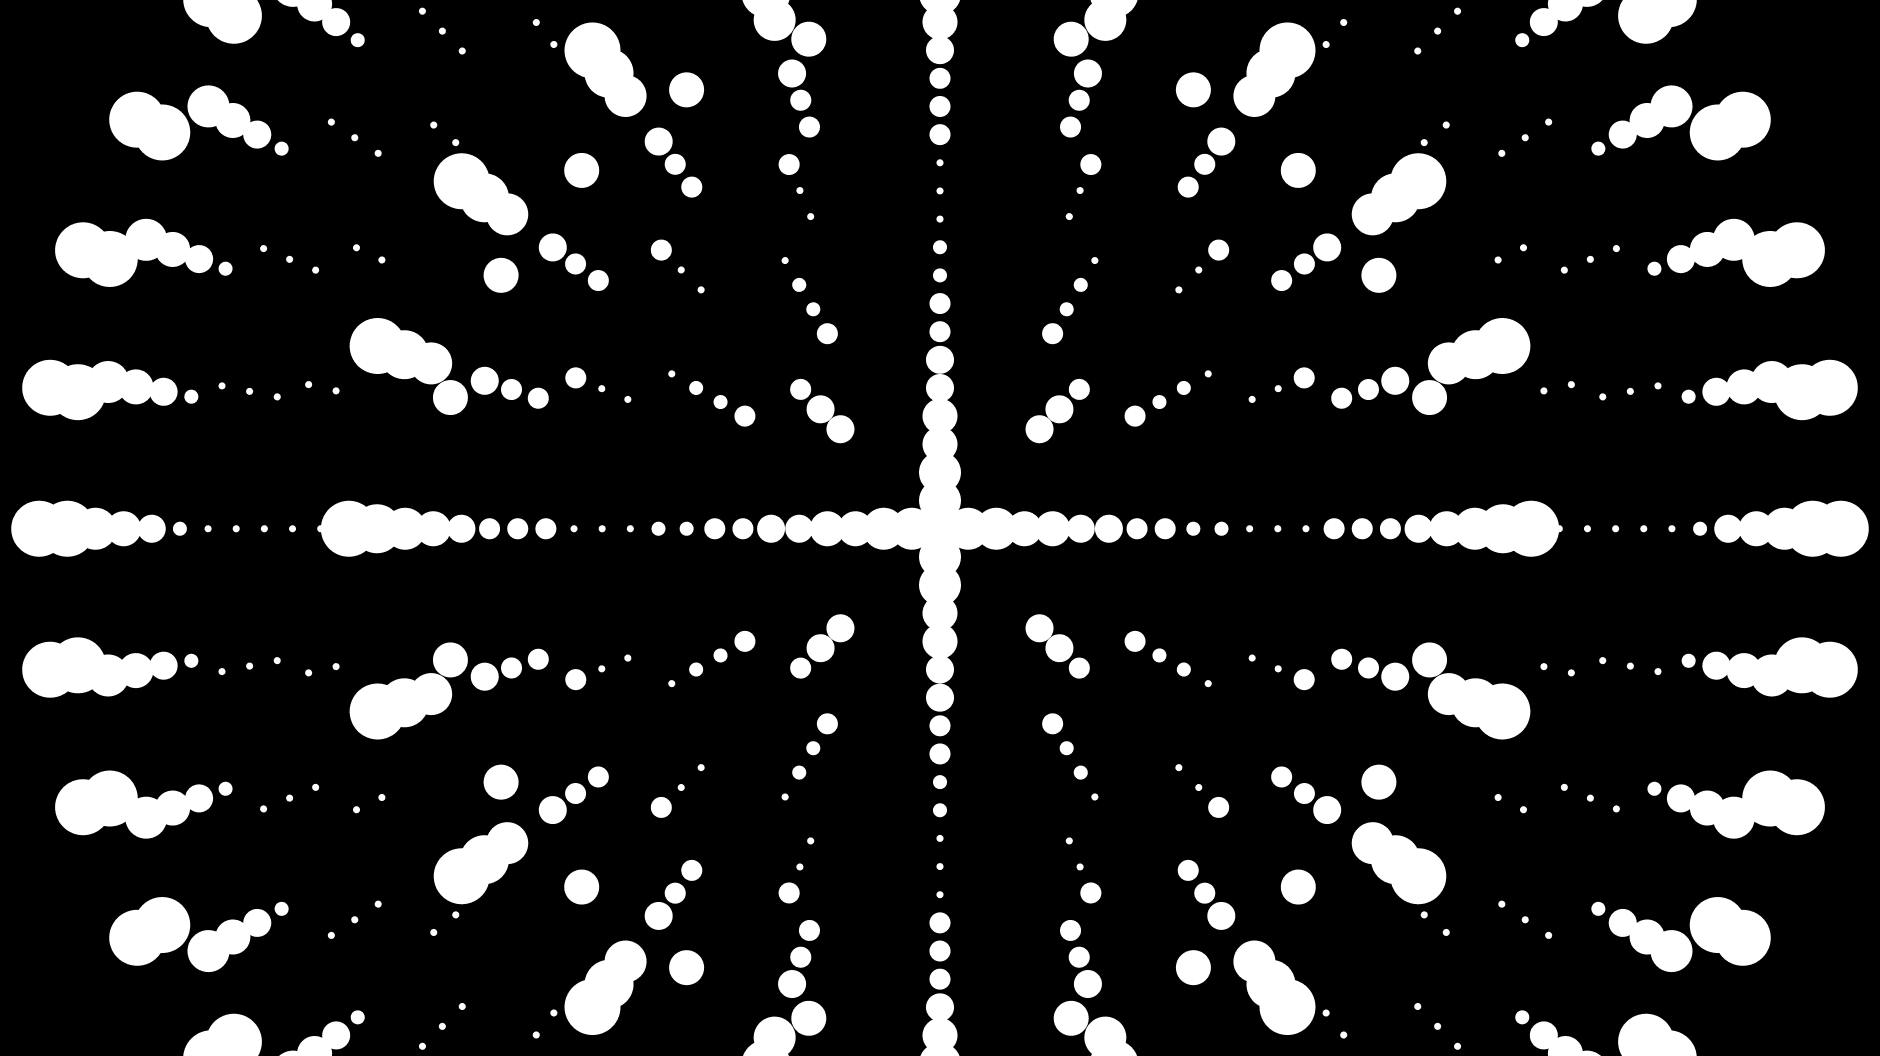 abstract black and white illustration of an aura